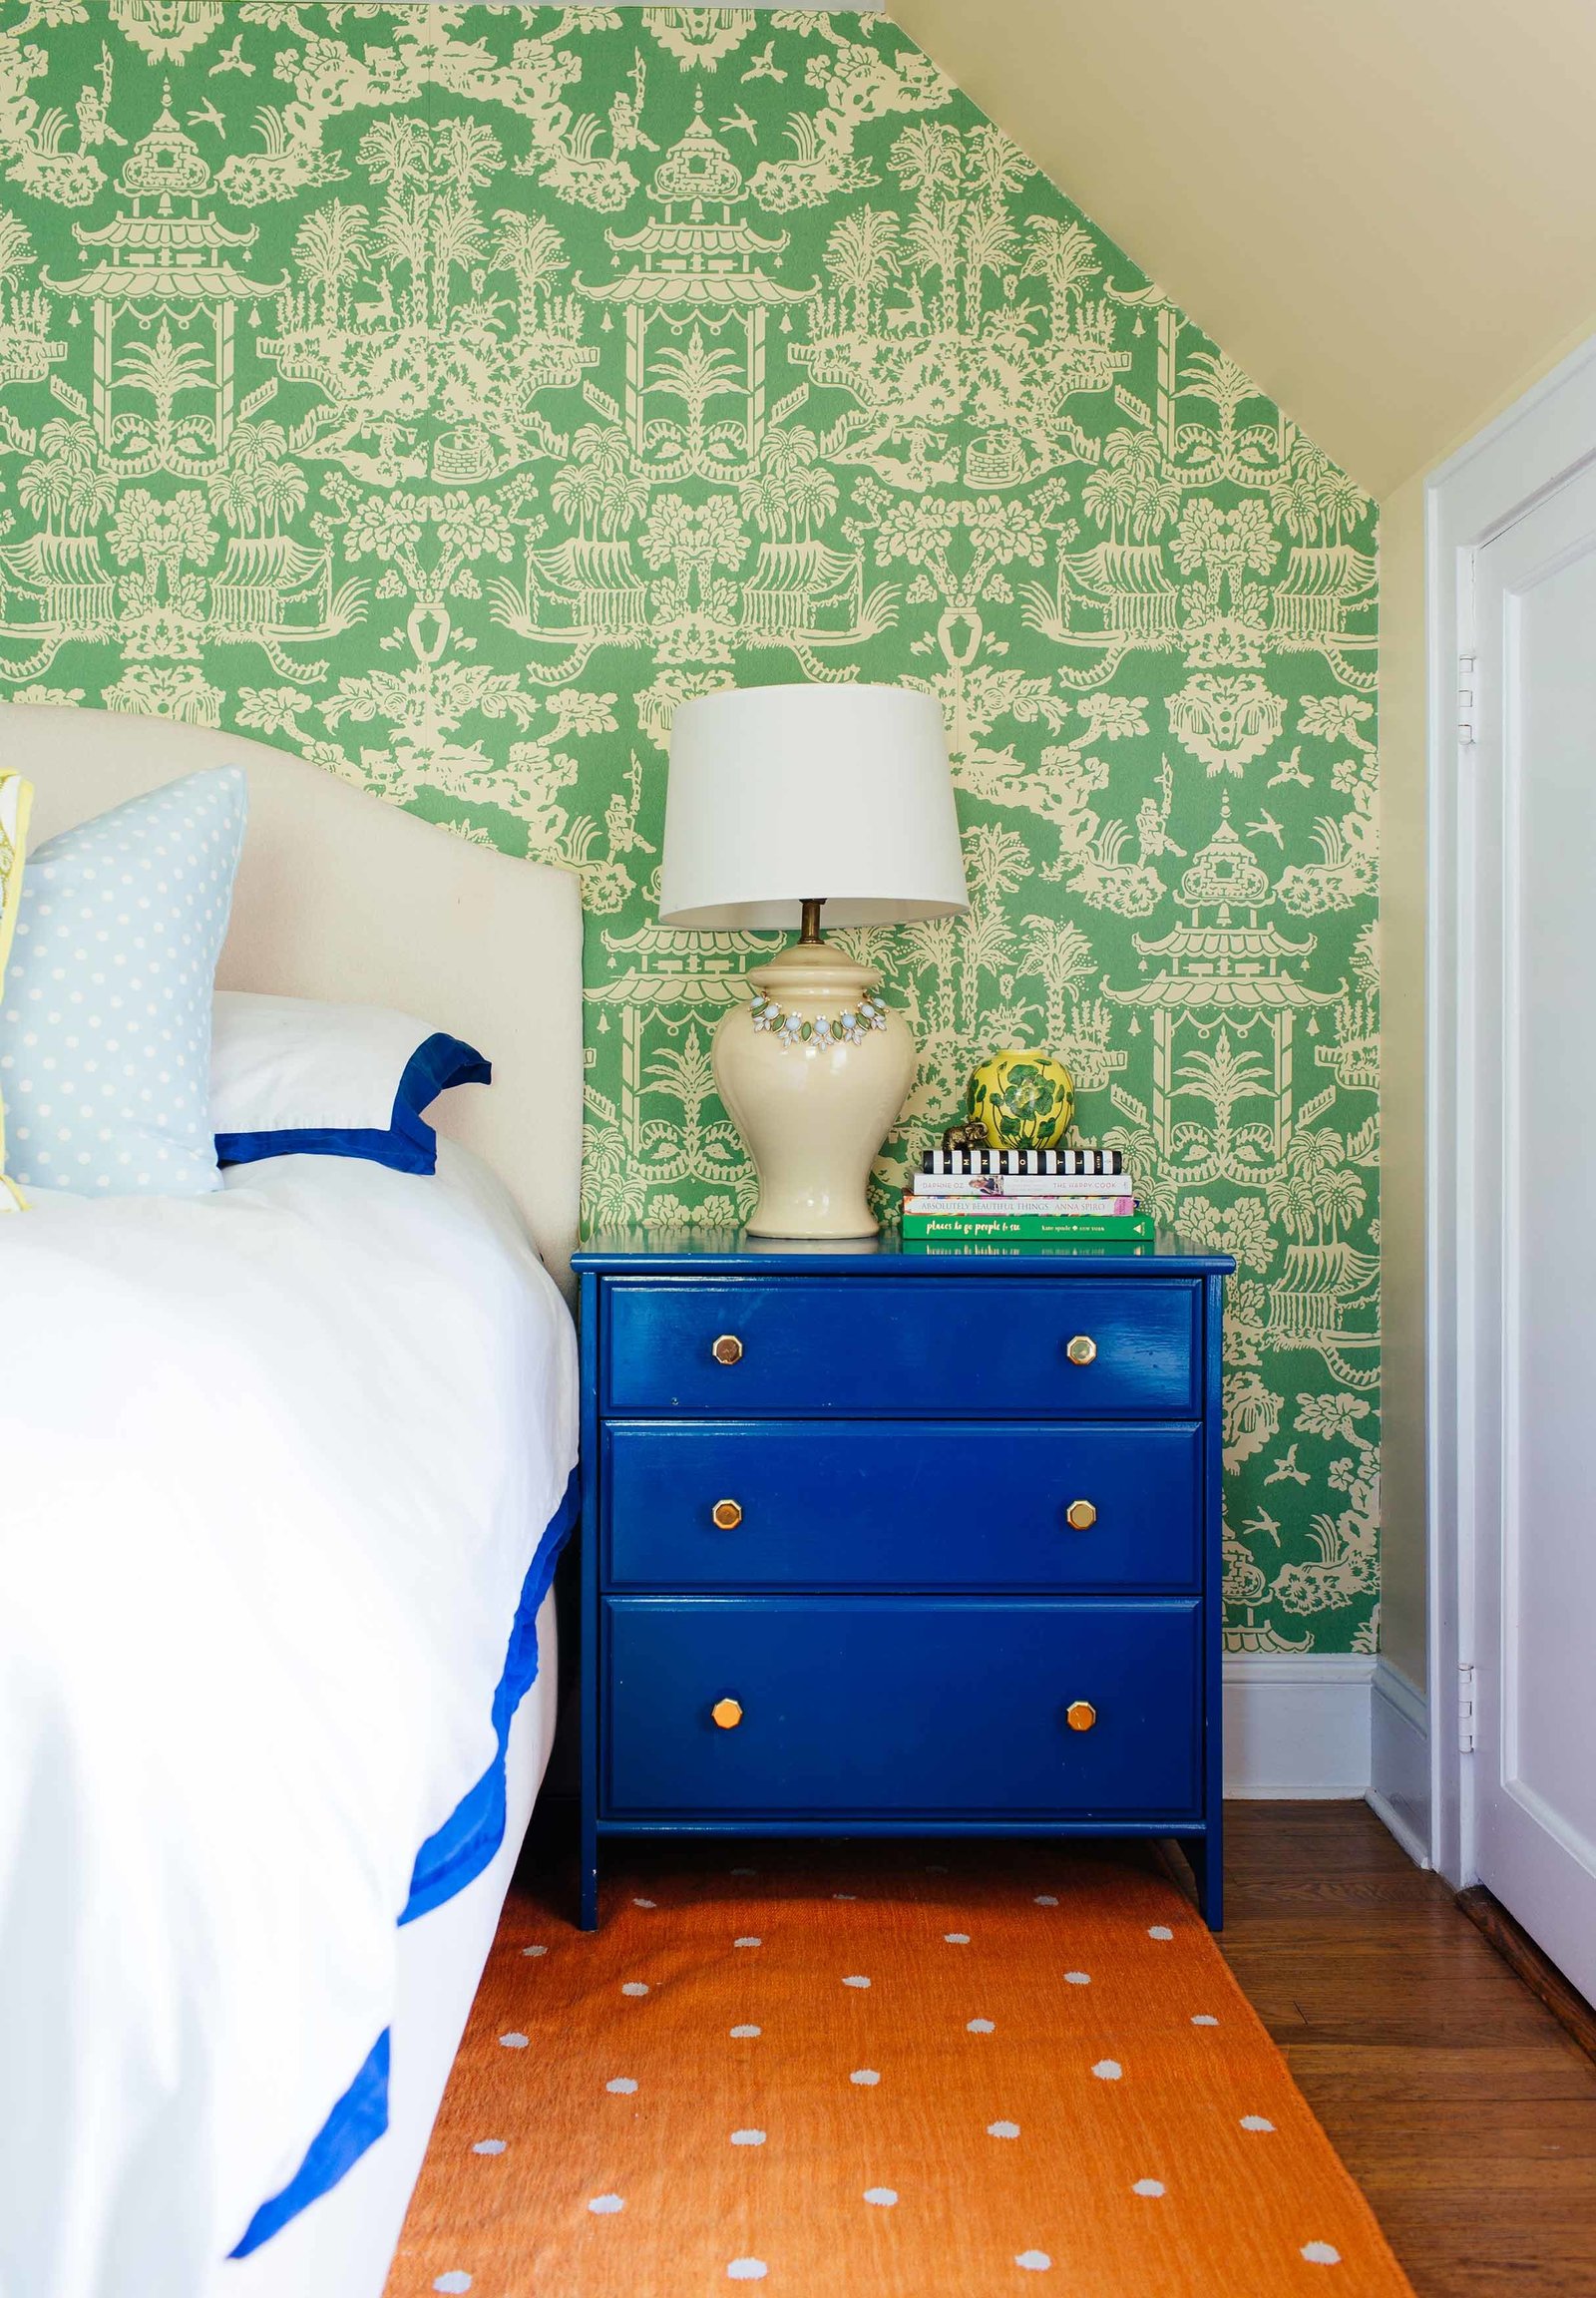 A white bed and blue end table in front of a green wall papered wall.